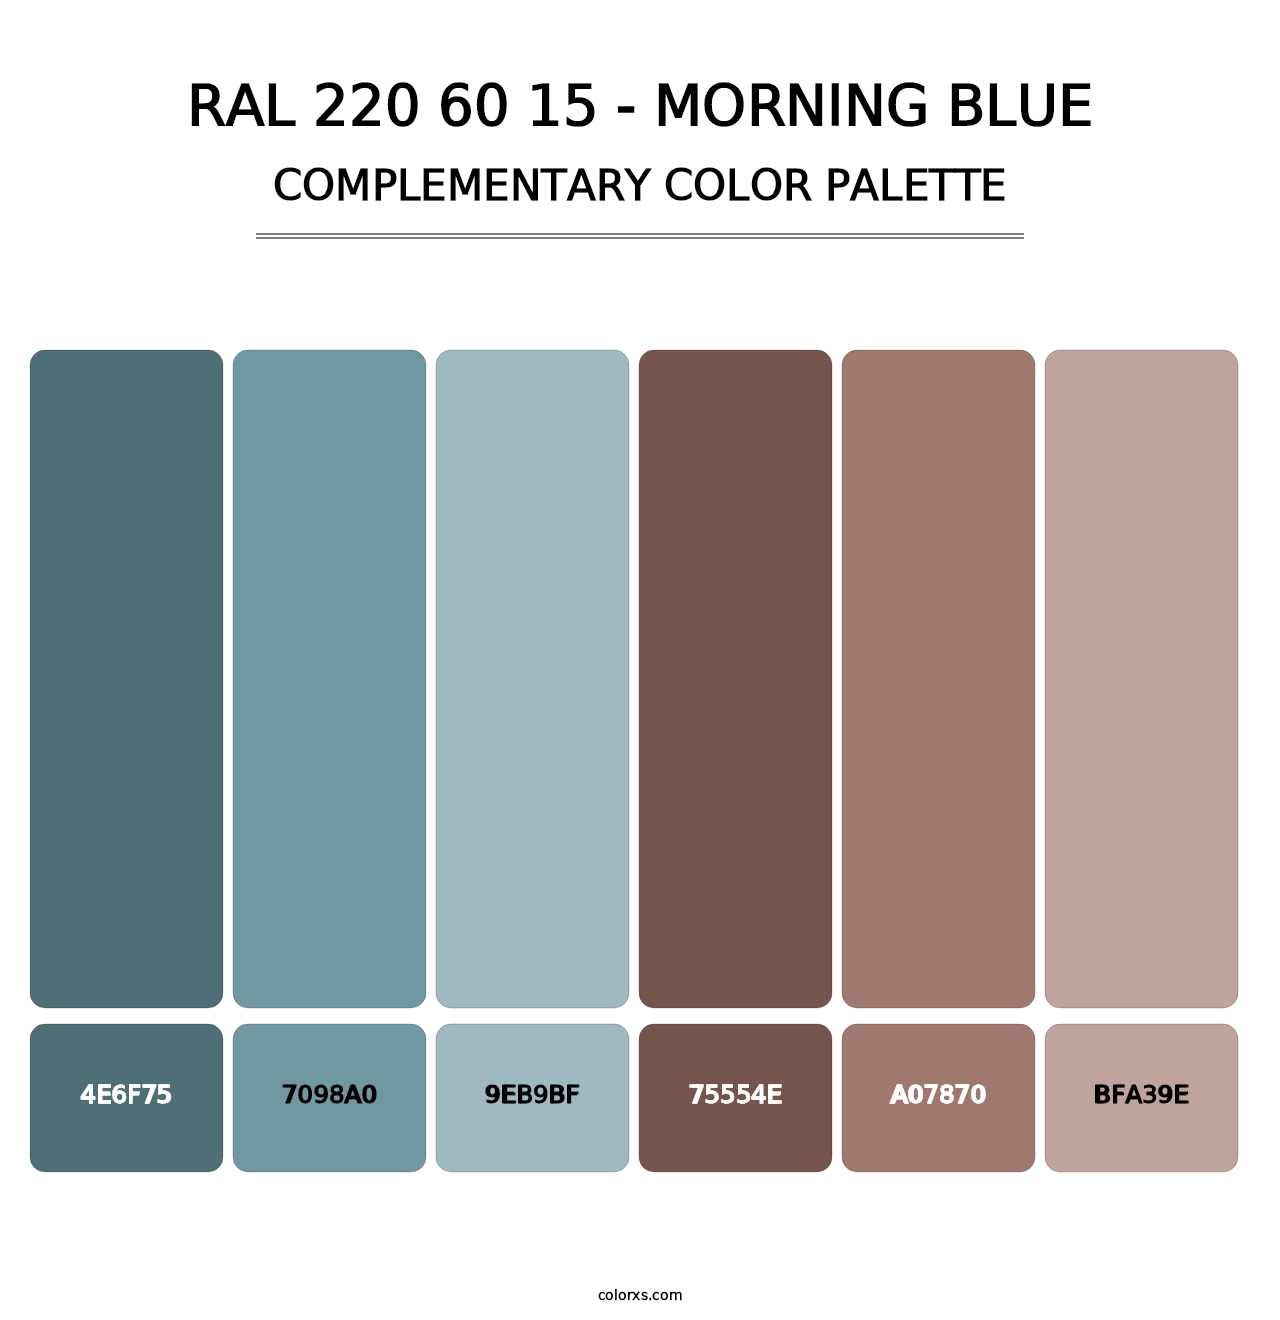 RAL 220 60 15 - Morning Blue - Complementary Color Palette